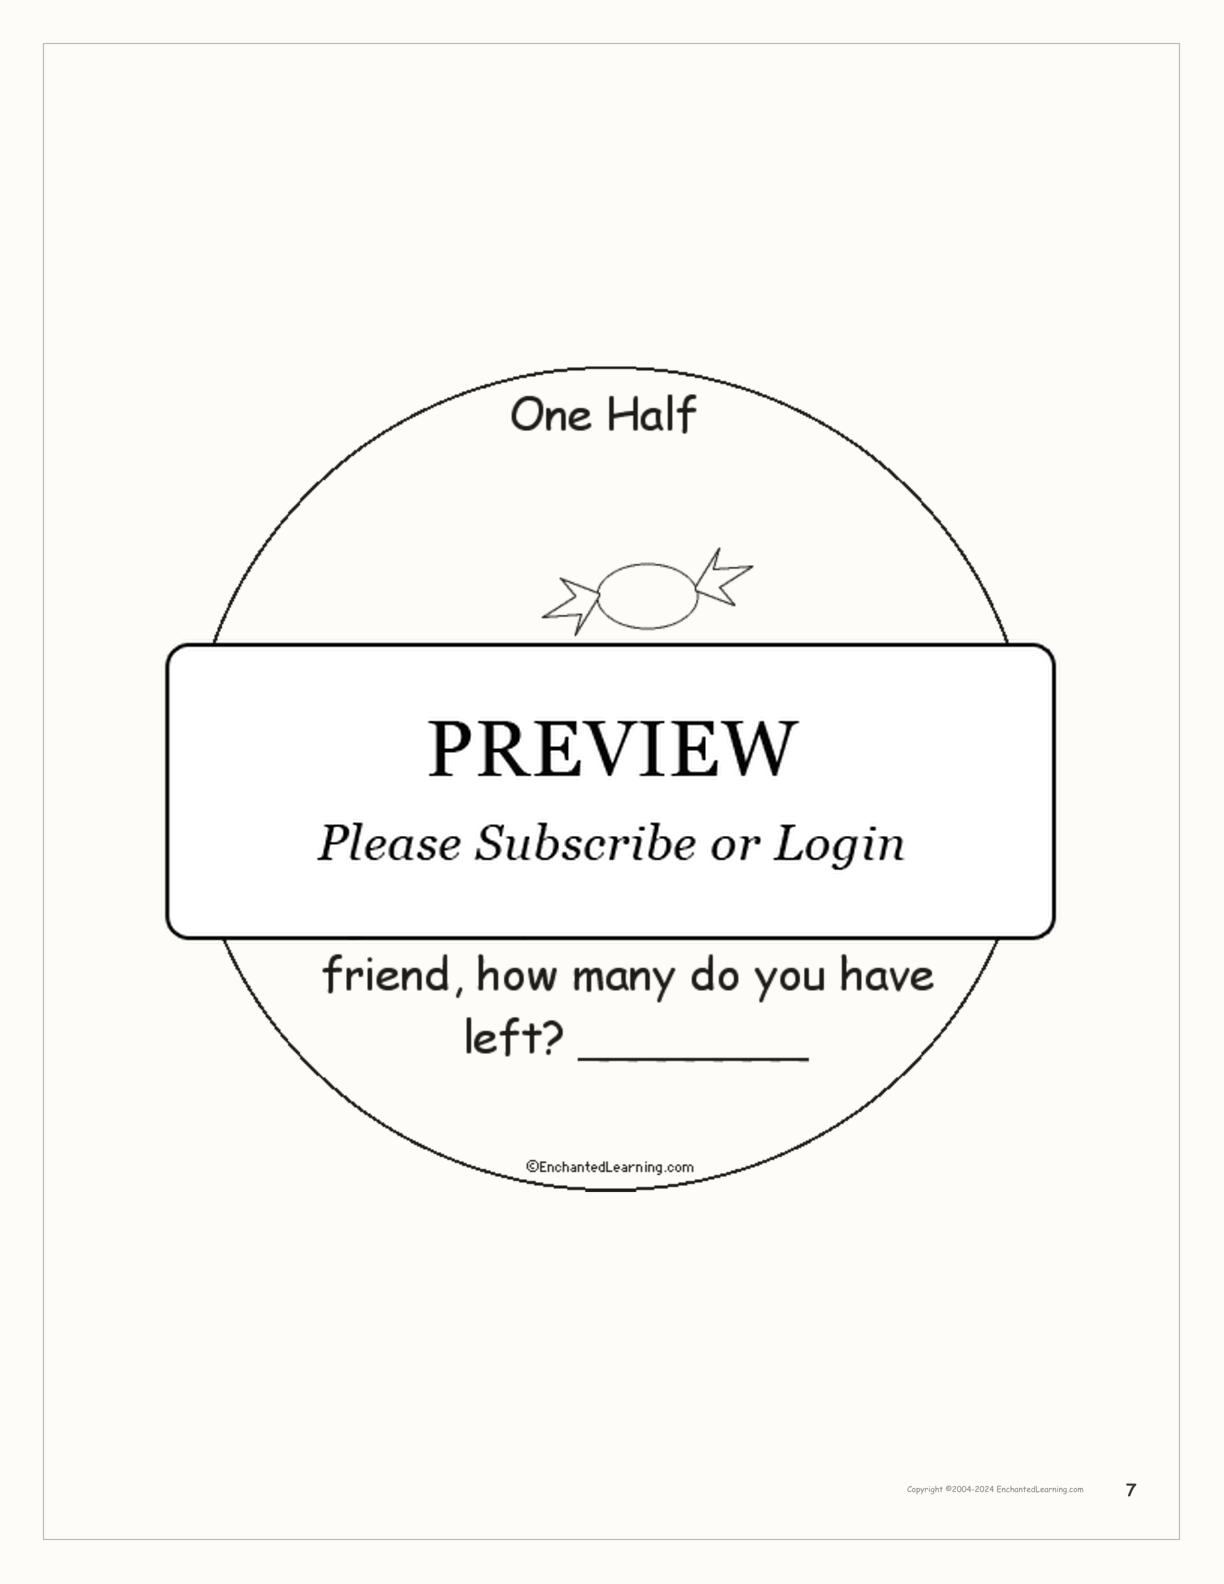 One Half: A Book on Fractions interactive printout page 7